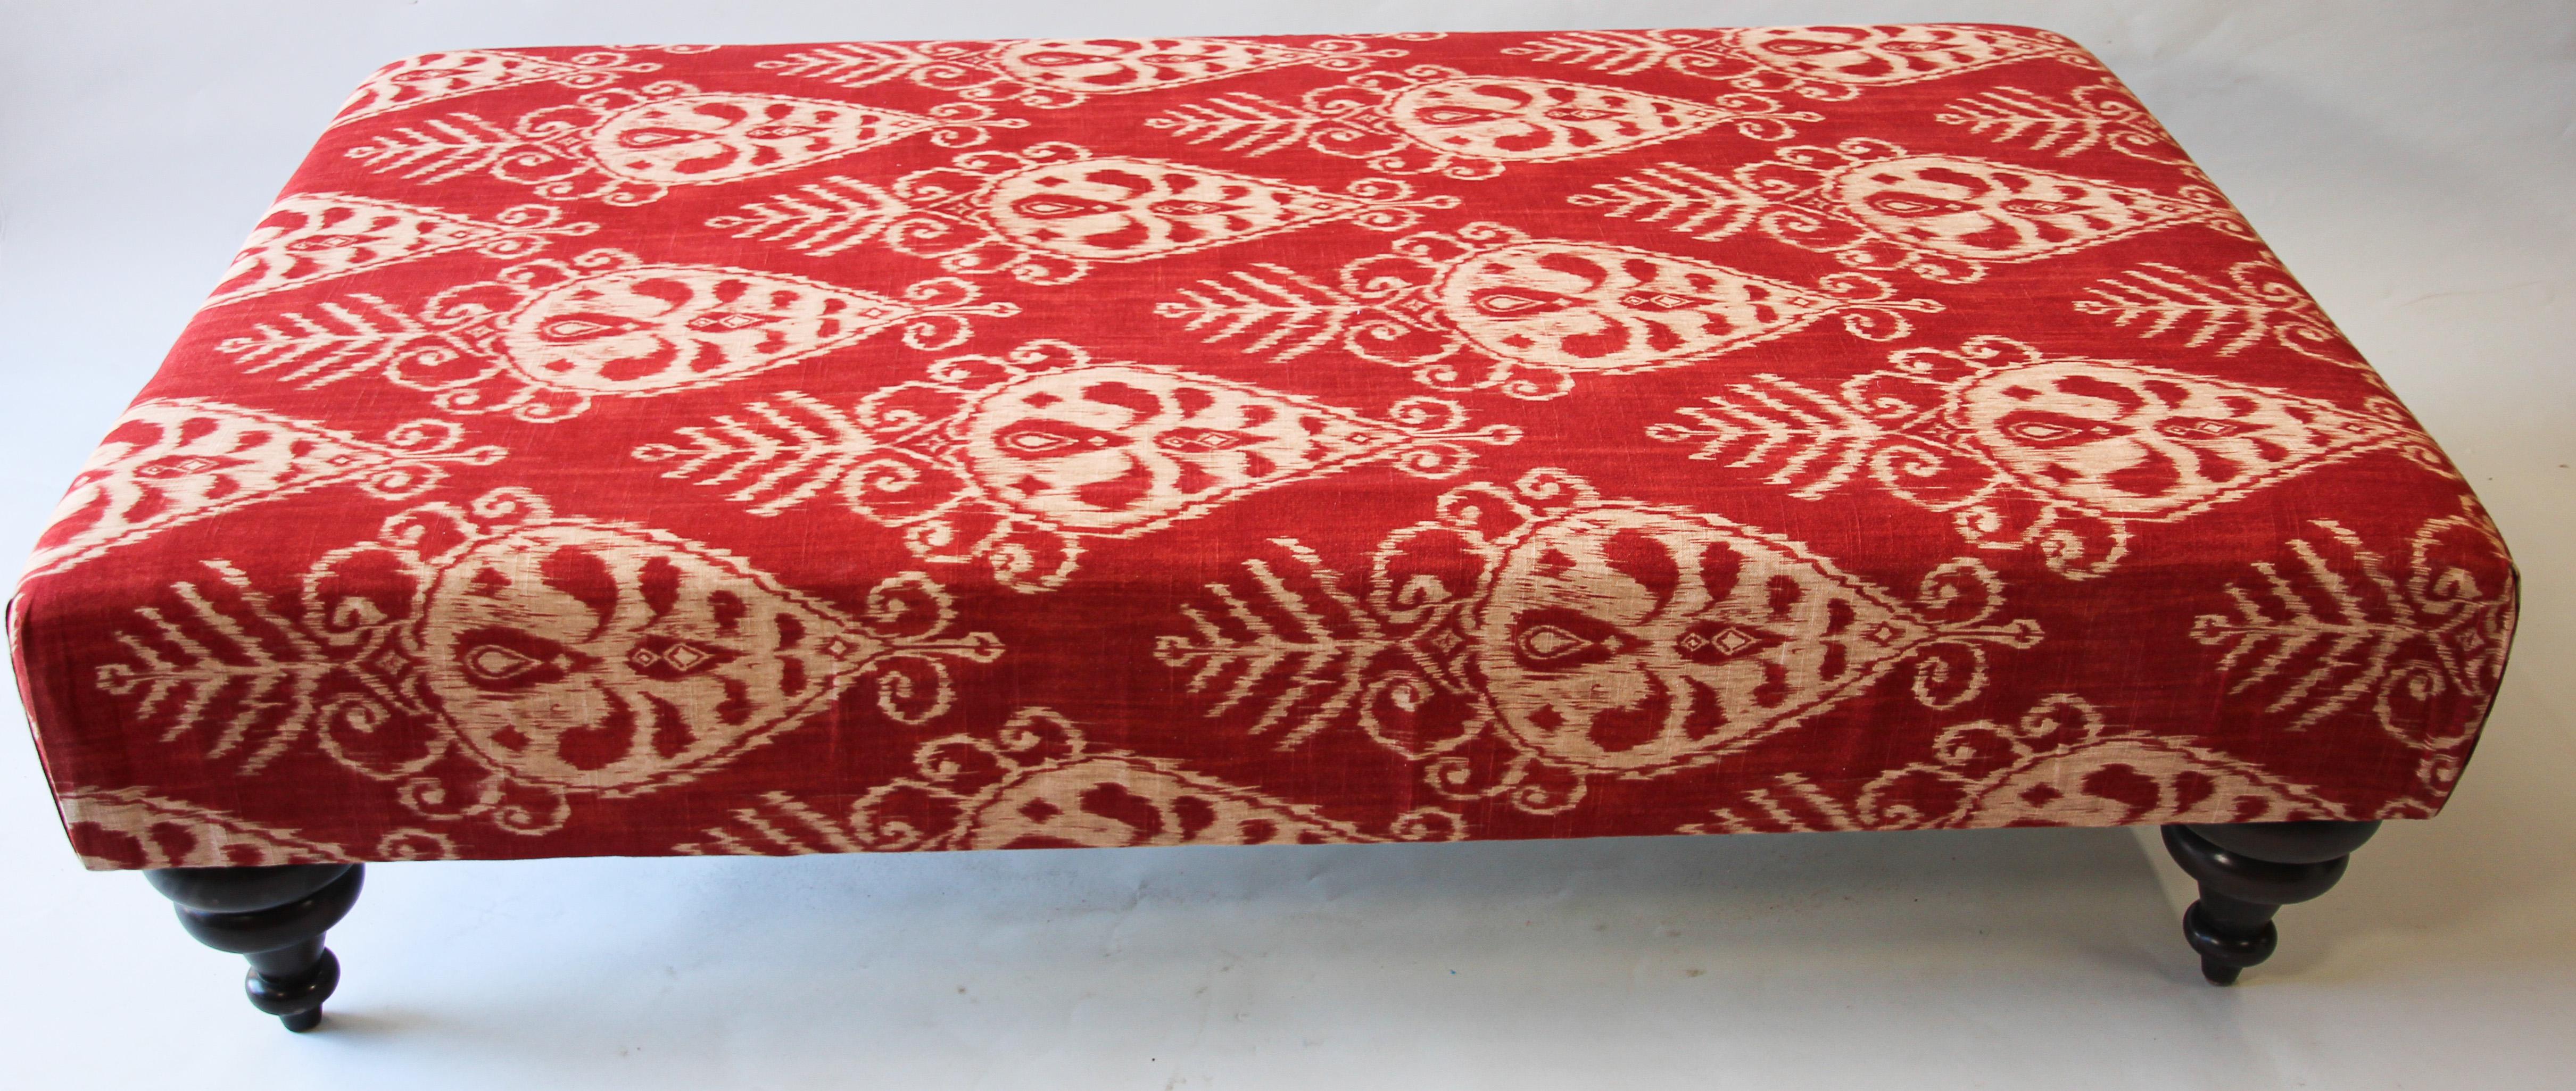 Oversized Moorish style table or ottoman.
Timelessly elegant, large upholstered ottoman, with classic turned wooden legs.
Could be used as a large rectangular bench covered with a Ikat red tribal style fabric.
Add a large Moroccan tray on it and use